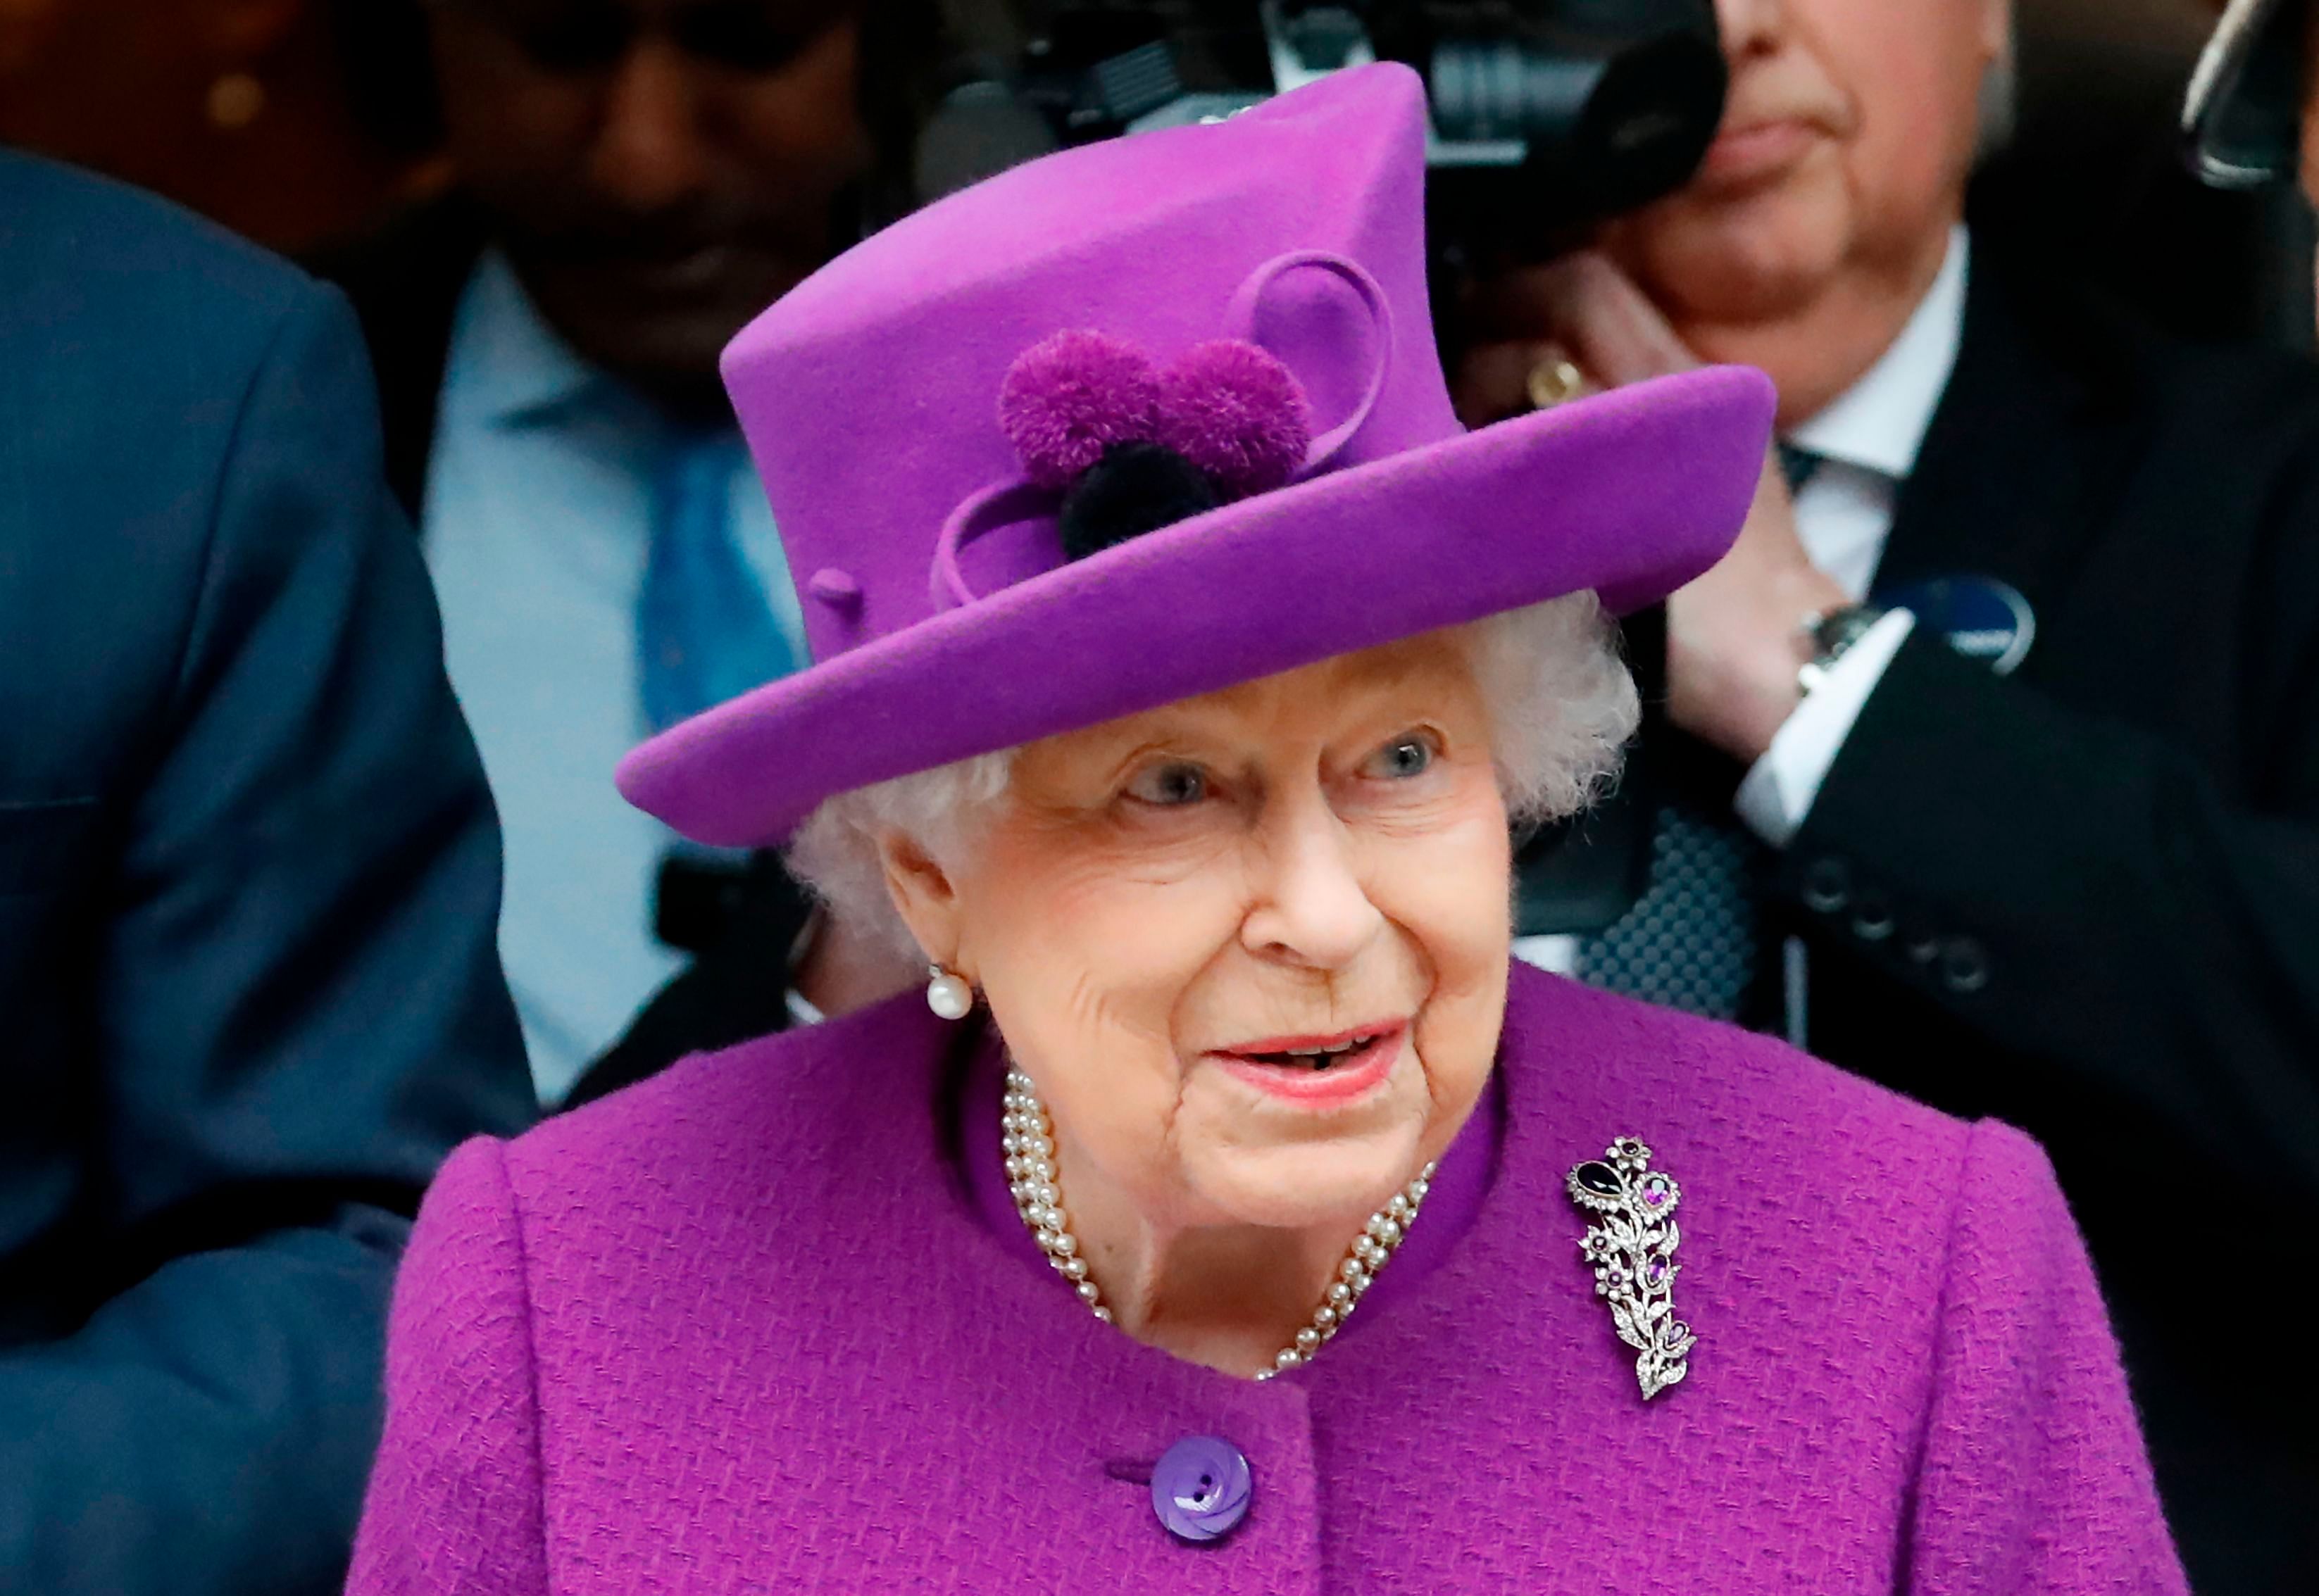 The queen, 93, is currently at Windsor Castle, her home to the west of London, with her husband, 98-year-old Prince Philip, and a small number of staff.(Credit: AFP Photo)